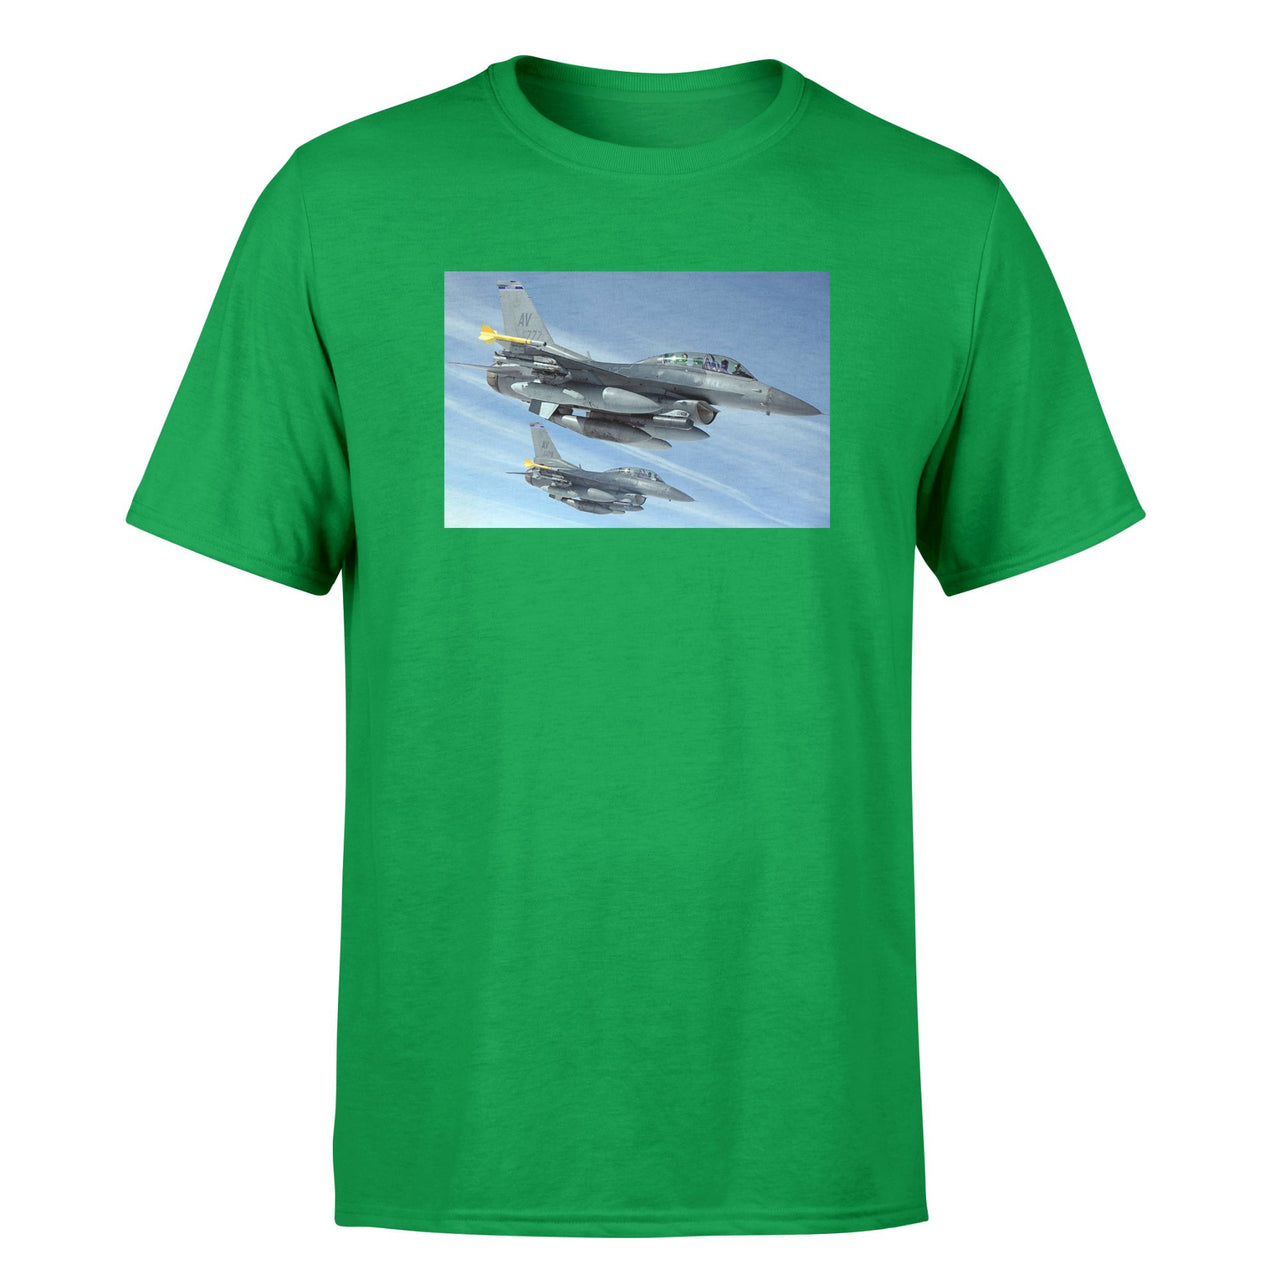 Two Fighting Falcon Designed T-Shirts